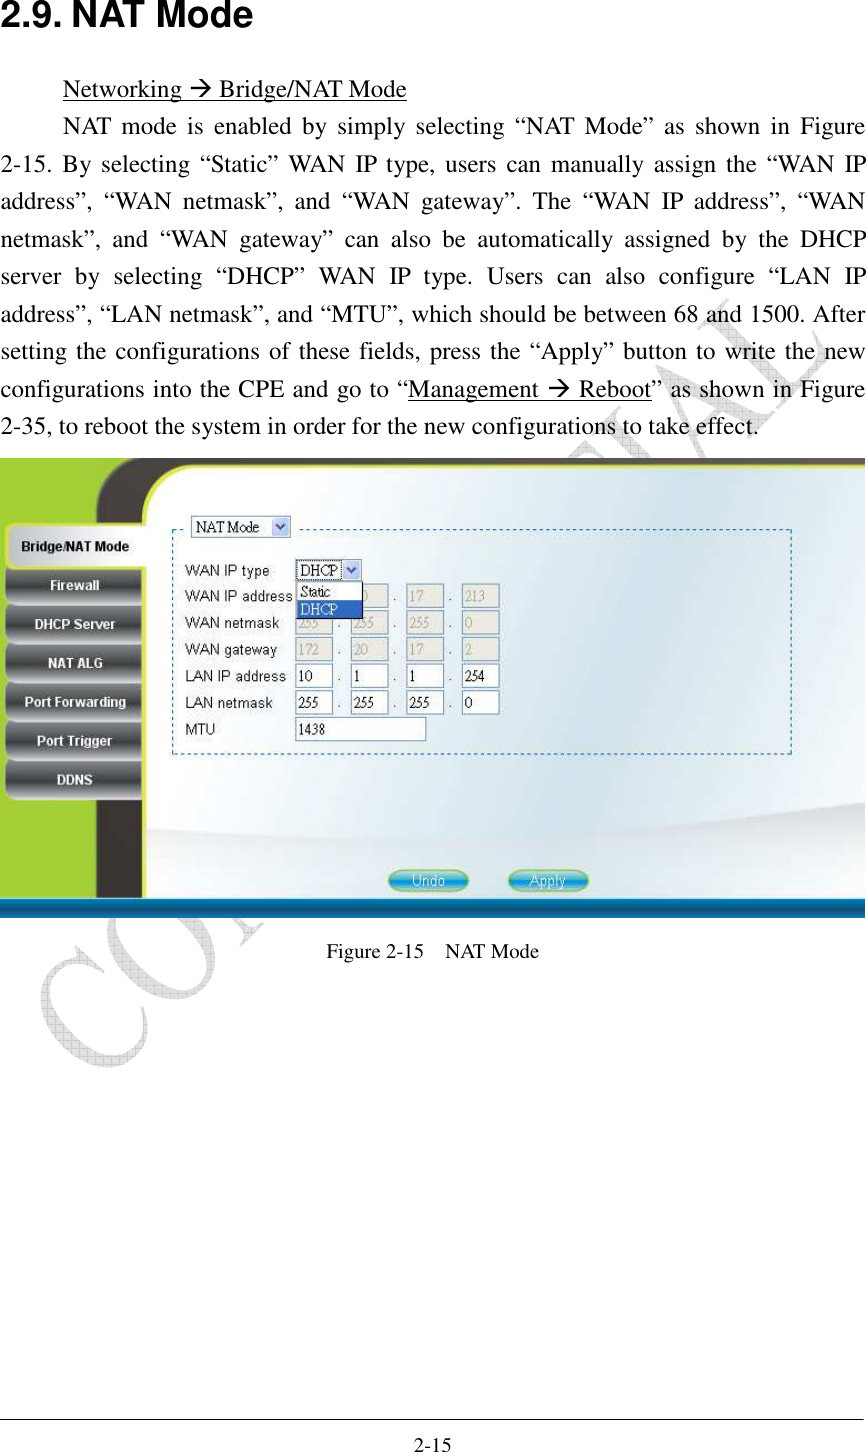    2-15 2.9. NAT Mode Networking  Bridge/NAT Mode NAT  mode  is  enabled  by  simply selecting  “NAT  Mode”  as  shown  in  Figure 2-15. By selecting “Static” WAN IP type, users can manually assign the  “WAN  IP address”,  “WAN  netmask”,  and  “WAN  gateway”.  The  “WAN  IP  address”,  “WAN netmask”,  and  “WAN  gateway”  can  also  be  automatically  assigned  by  the  DHCP server  by  selecting  “DHCP”  WAN  IP  type.  Users  can  also  configure  “LAN  IP address”, “LAN netmask”, and “MTU”, which should be between 68 and 1500. After setting the configurations of these fields, press the “Apply” button to write the new configurations into the CPE and go to “Management  Reboot” as shown in Figure 2-35, to reboot the system in order for the new configurations to take effect.  Figure 2-15    NAT Mode  